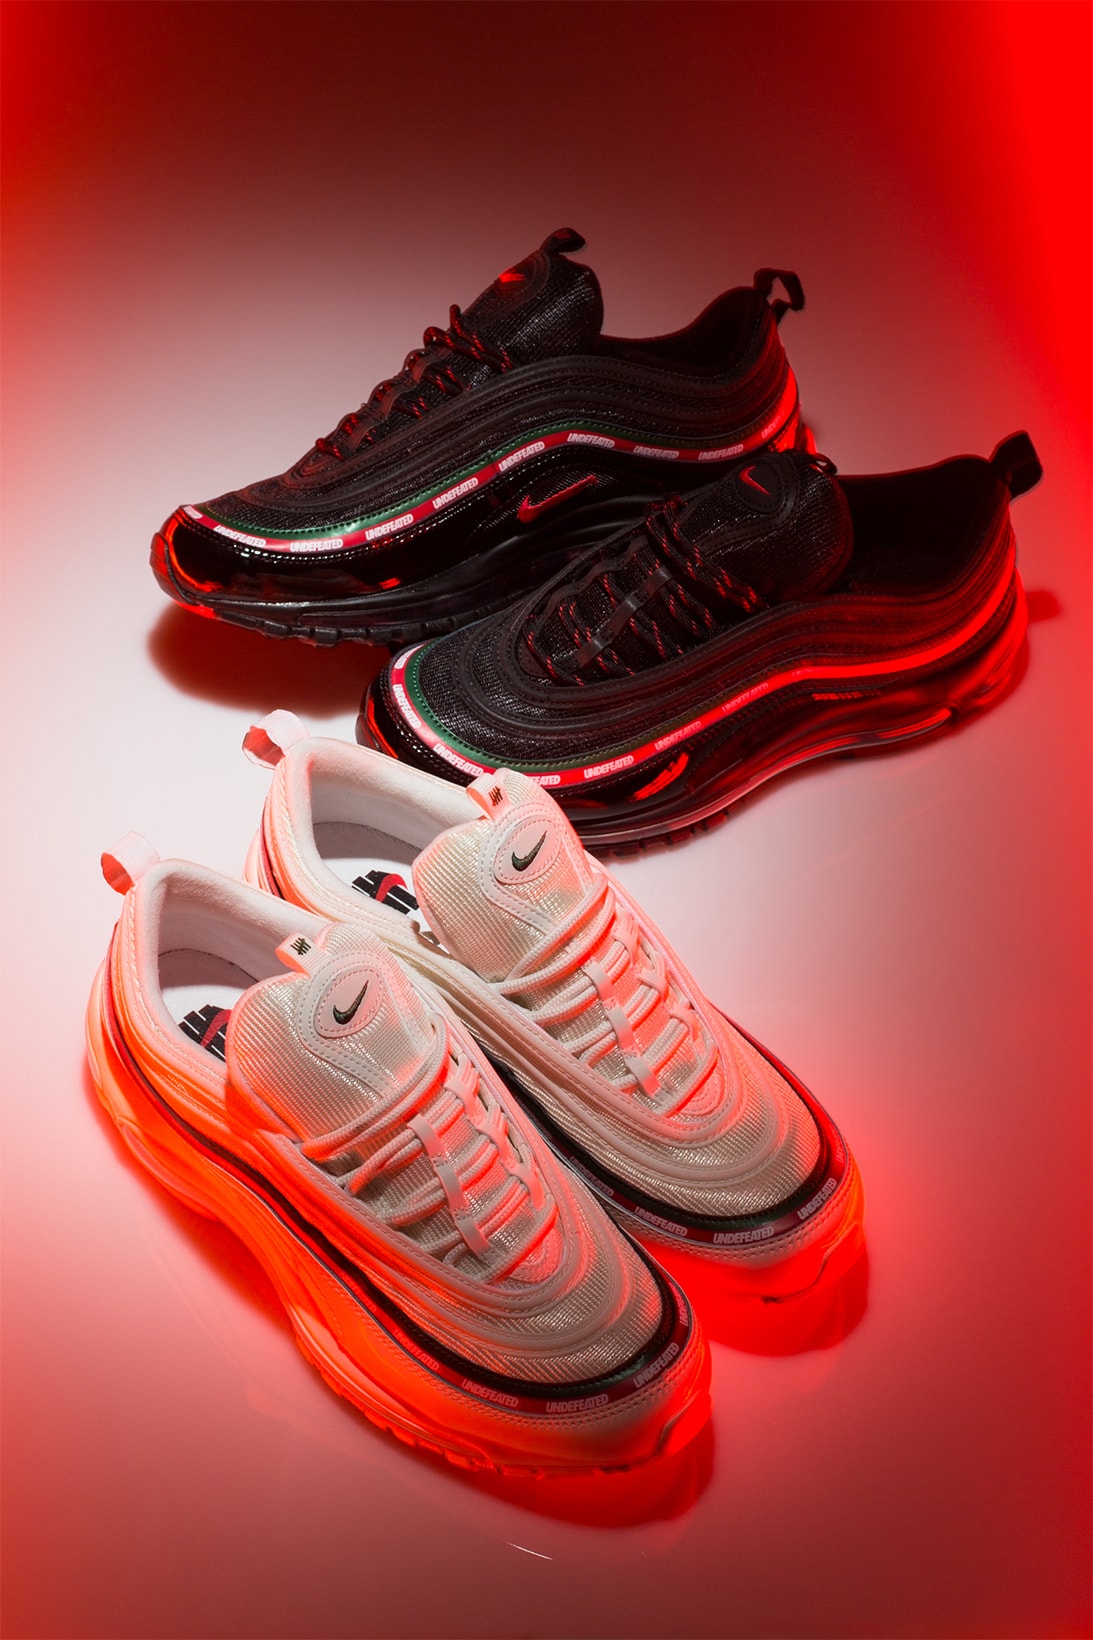 UNDEFEATED x Nike Air Max 97 Apparel